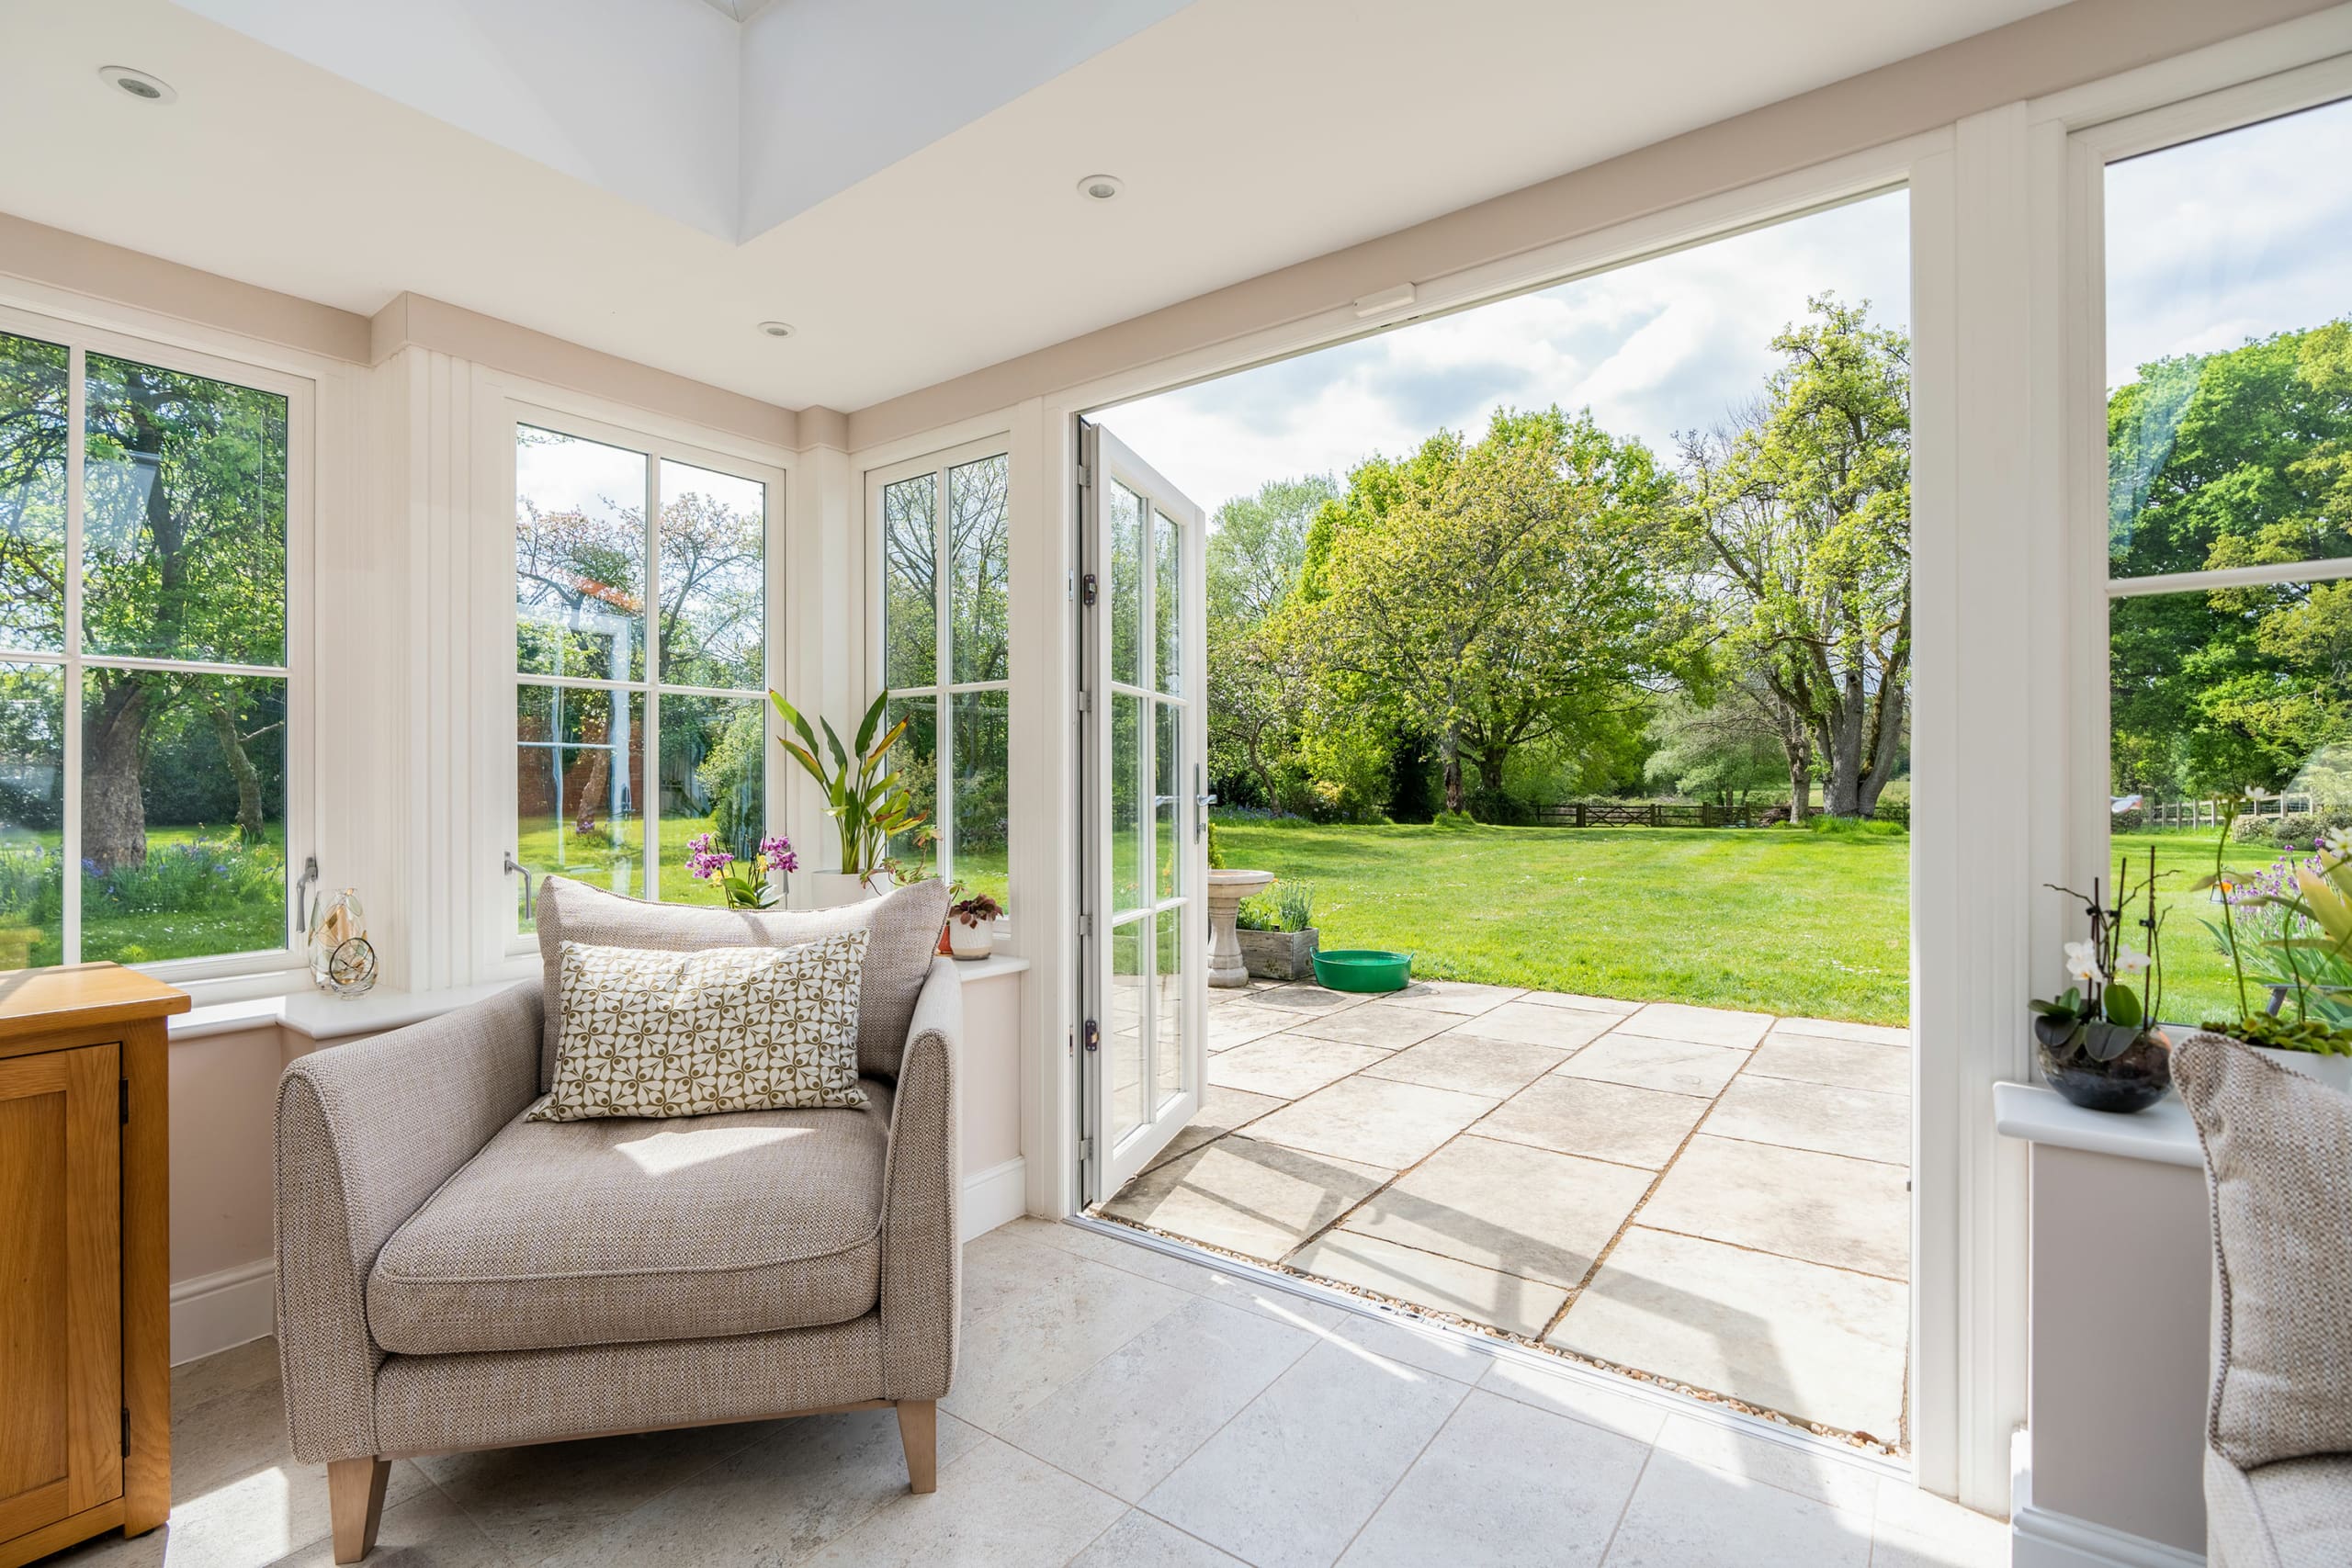 Modern extension with french doors to large patio and garden.